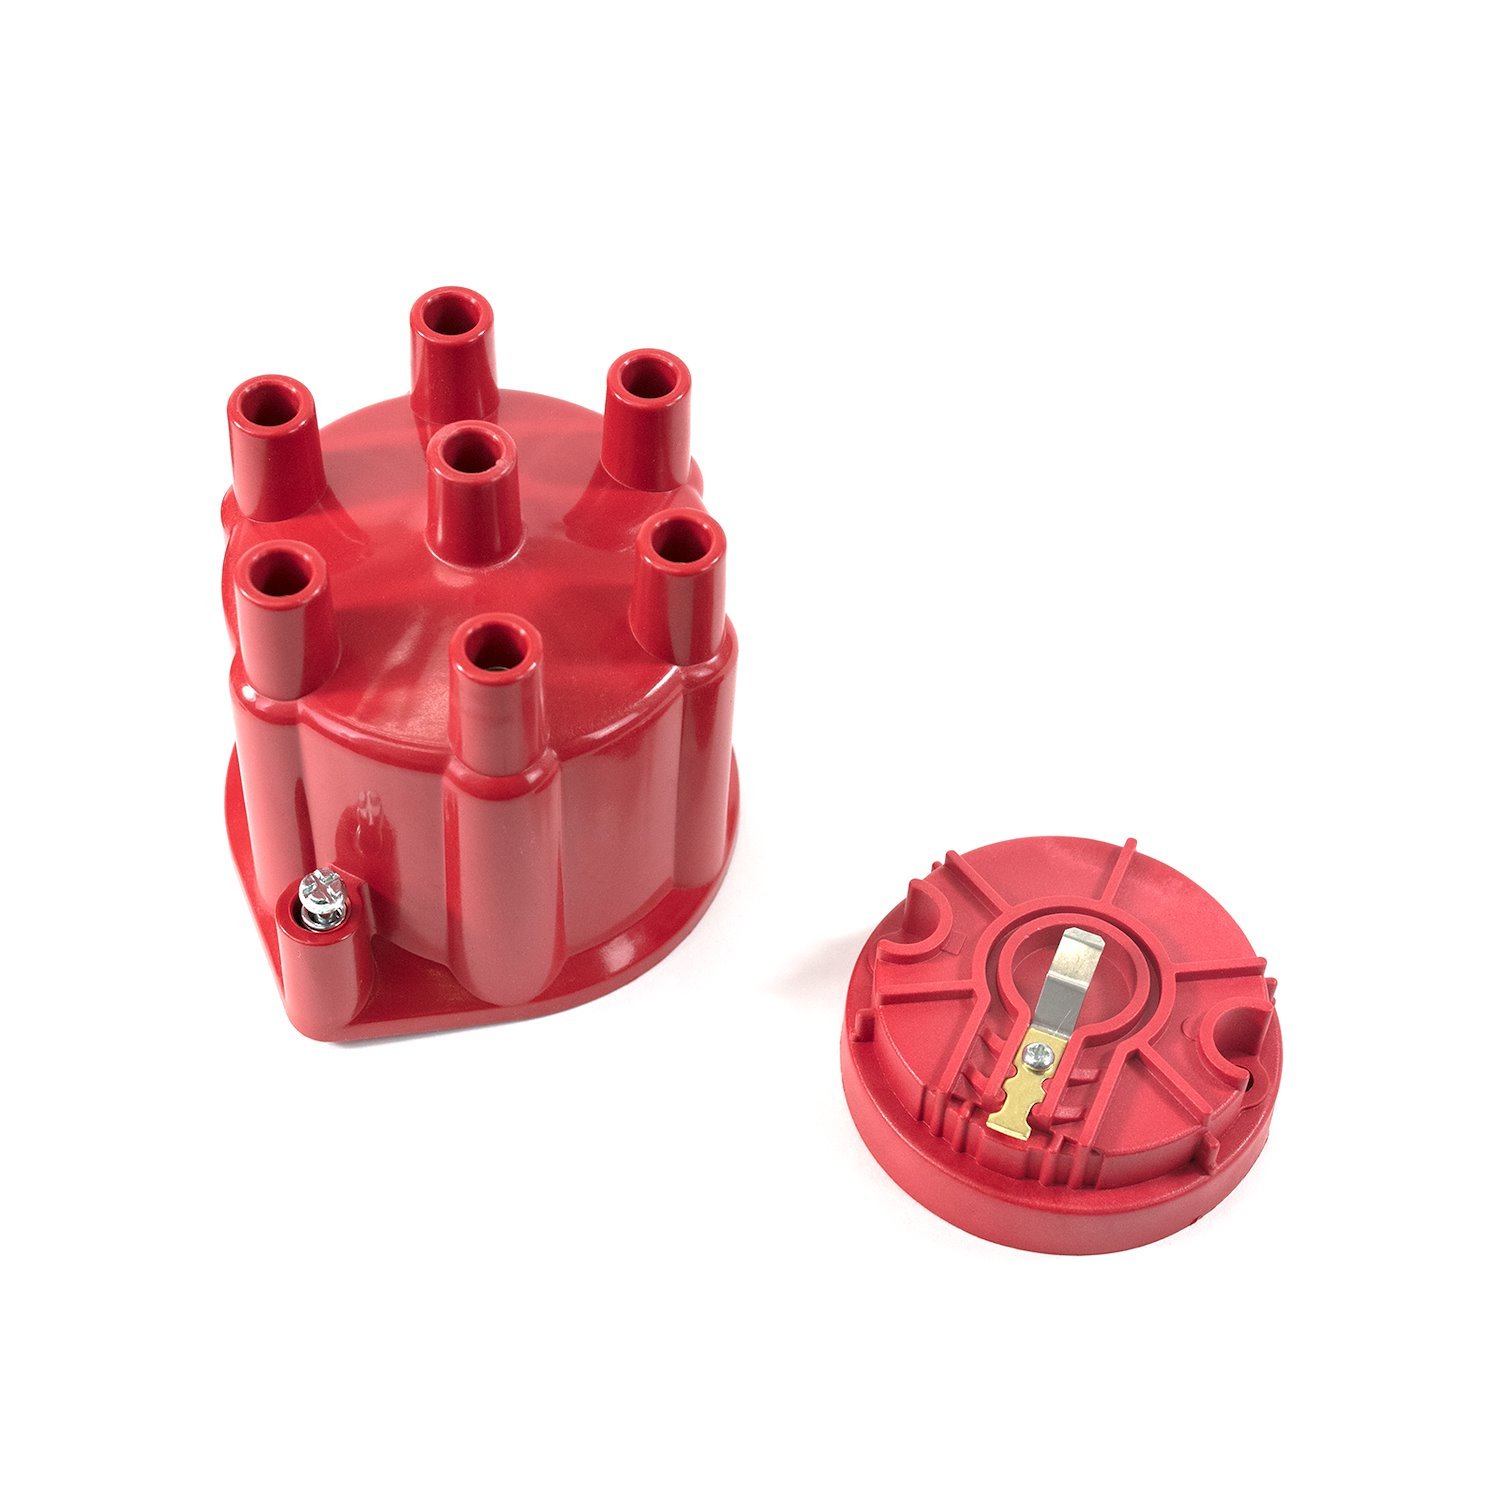 JM6976R Pro Series Distributor Cap and Rotor Kit, 6 Cylinder Female, Red